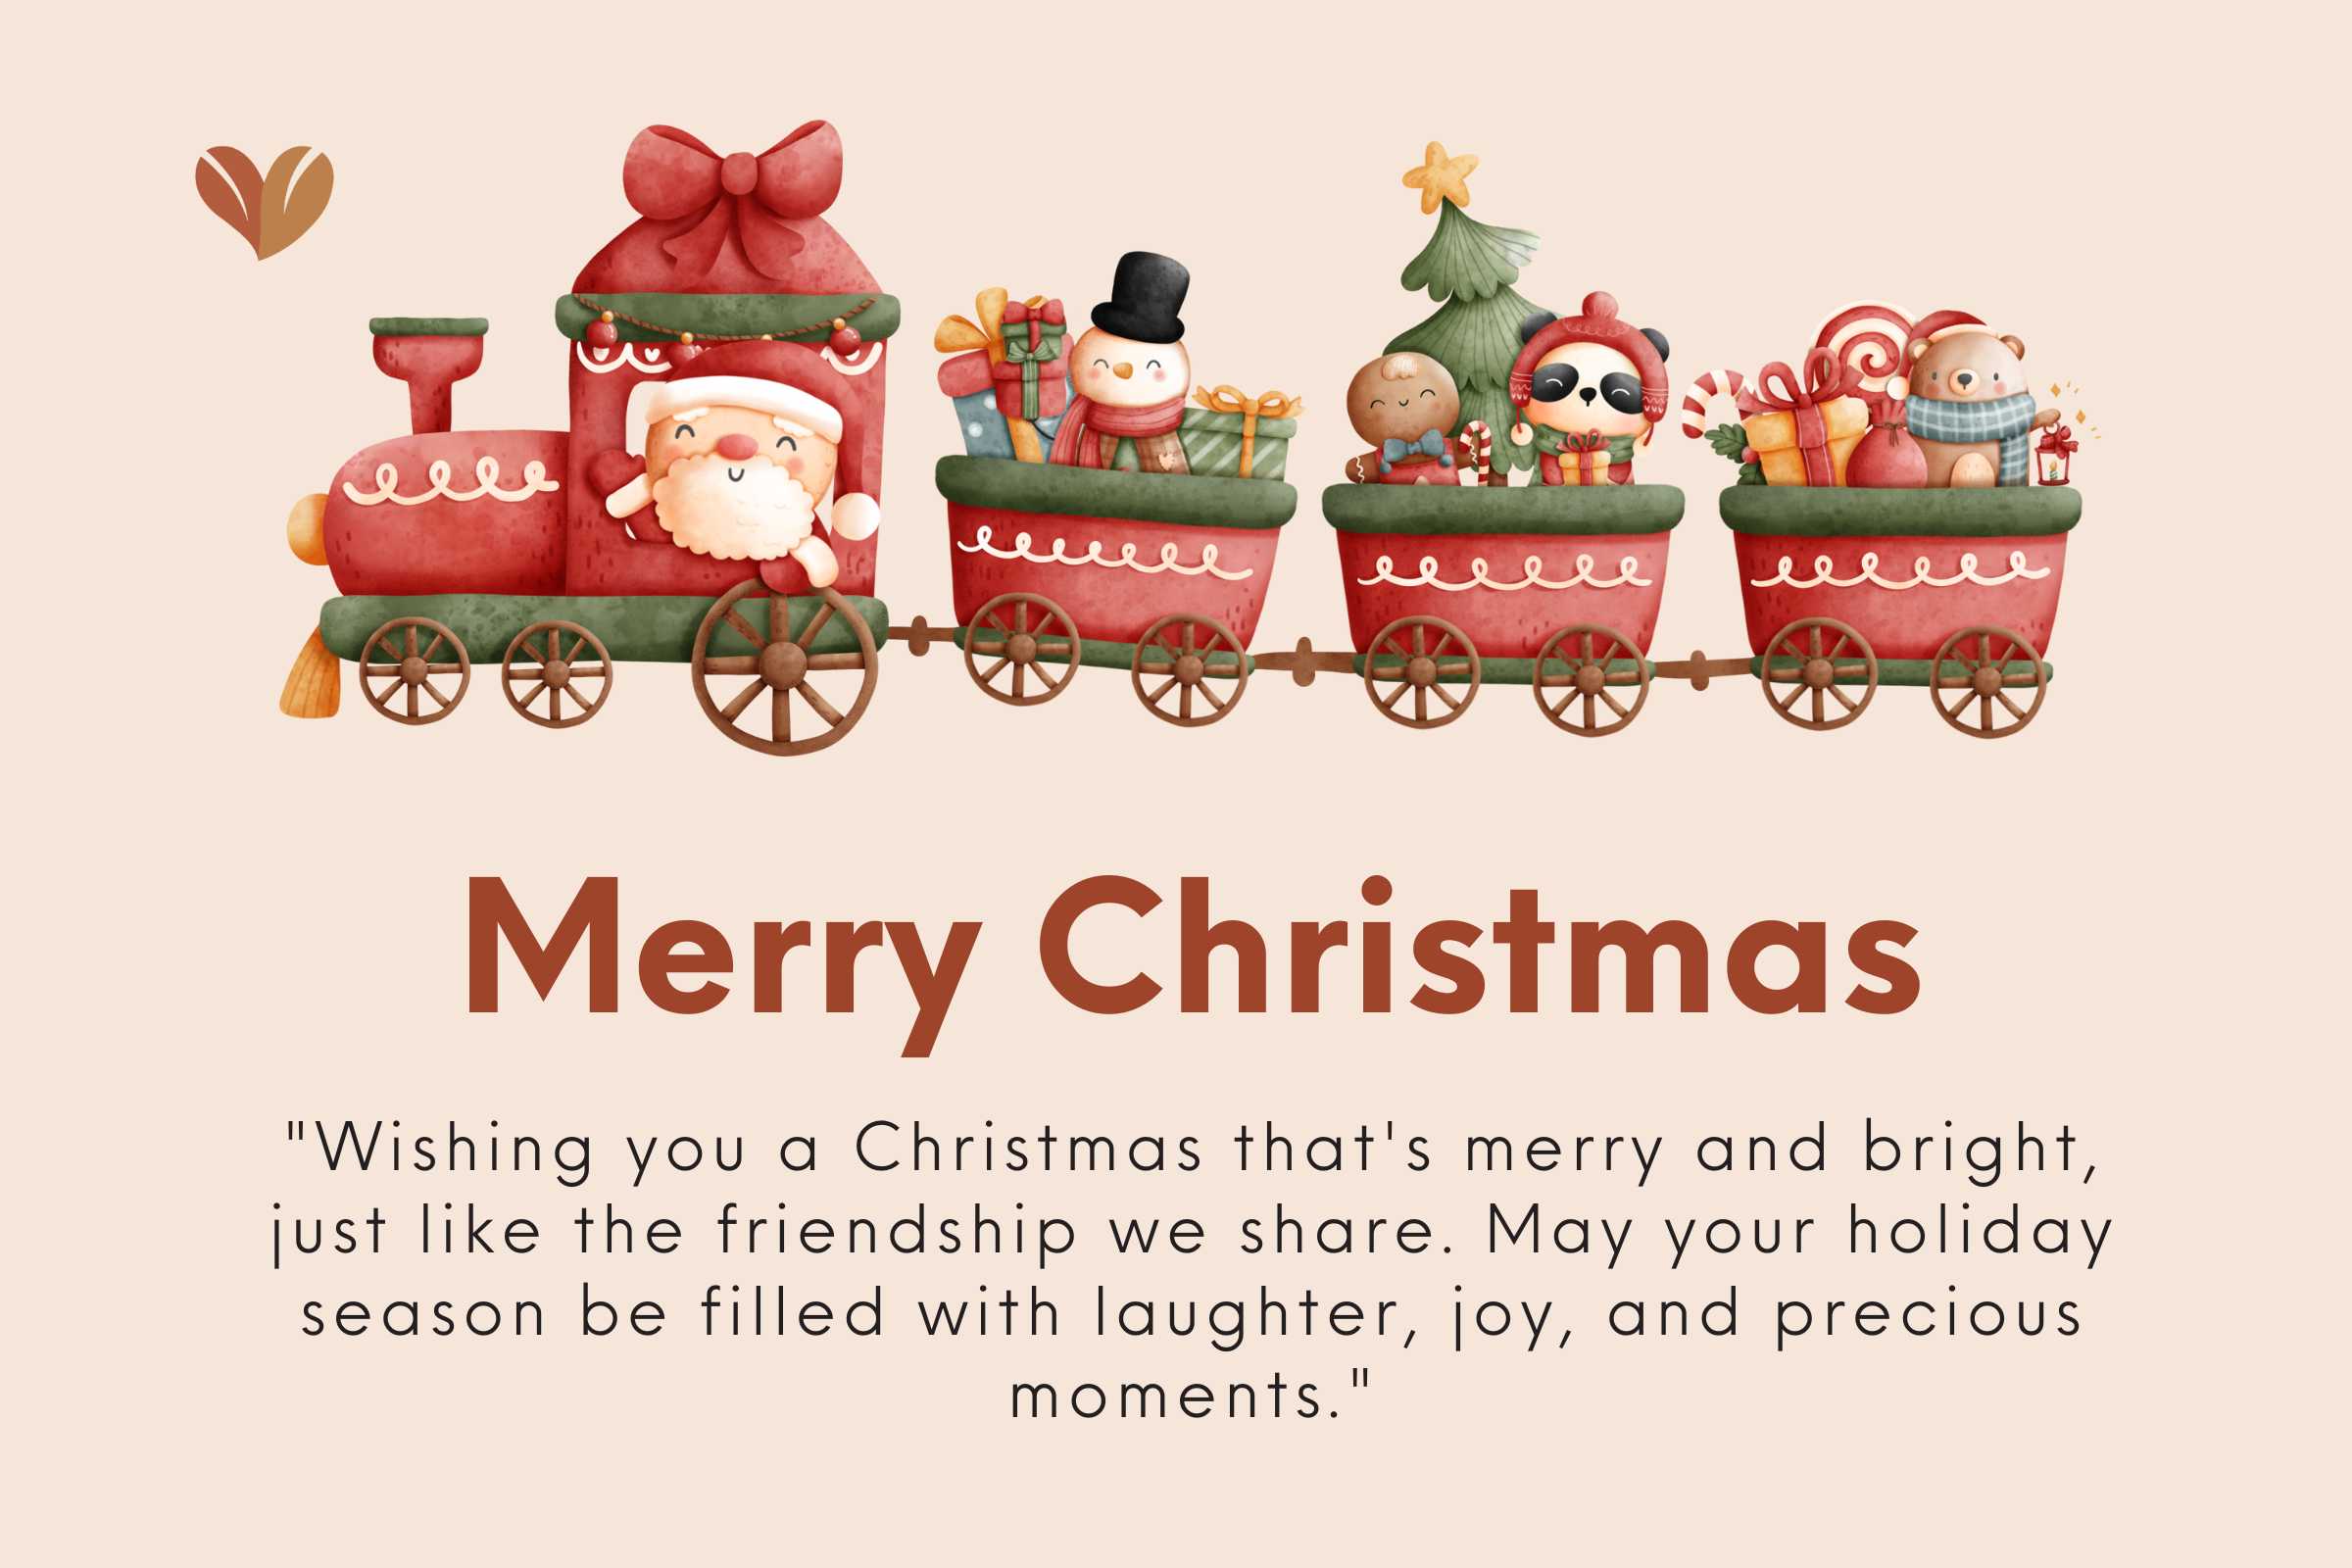 Merry Christmas, my dear friend - Christmas wishes for friends